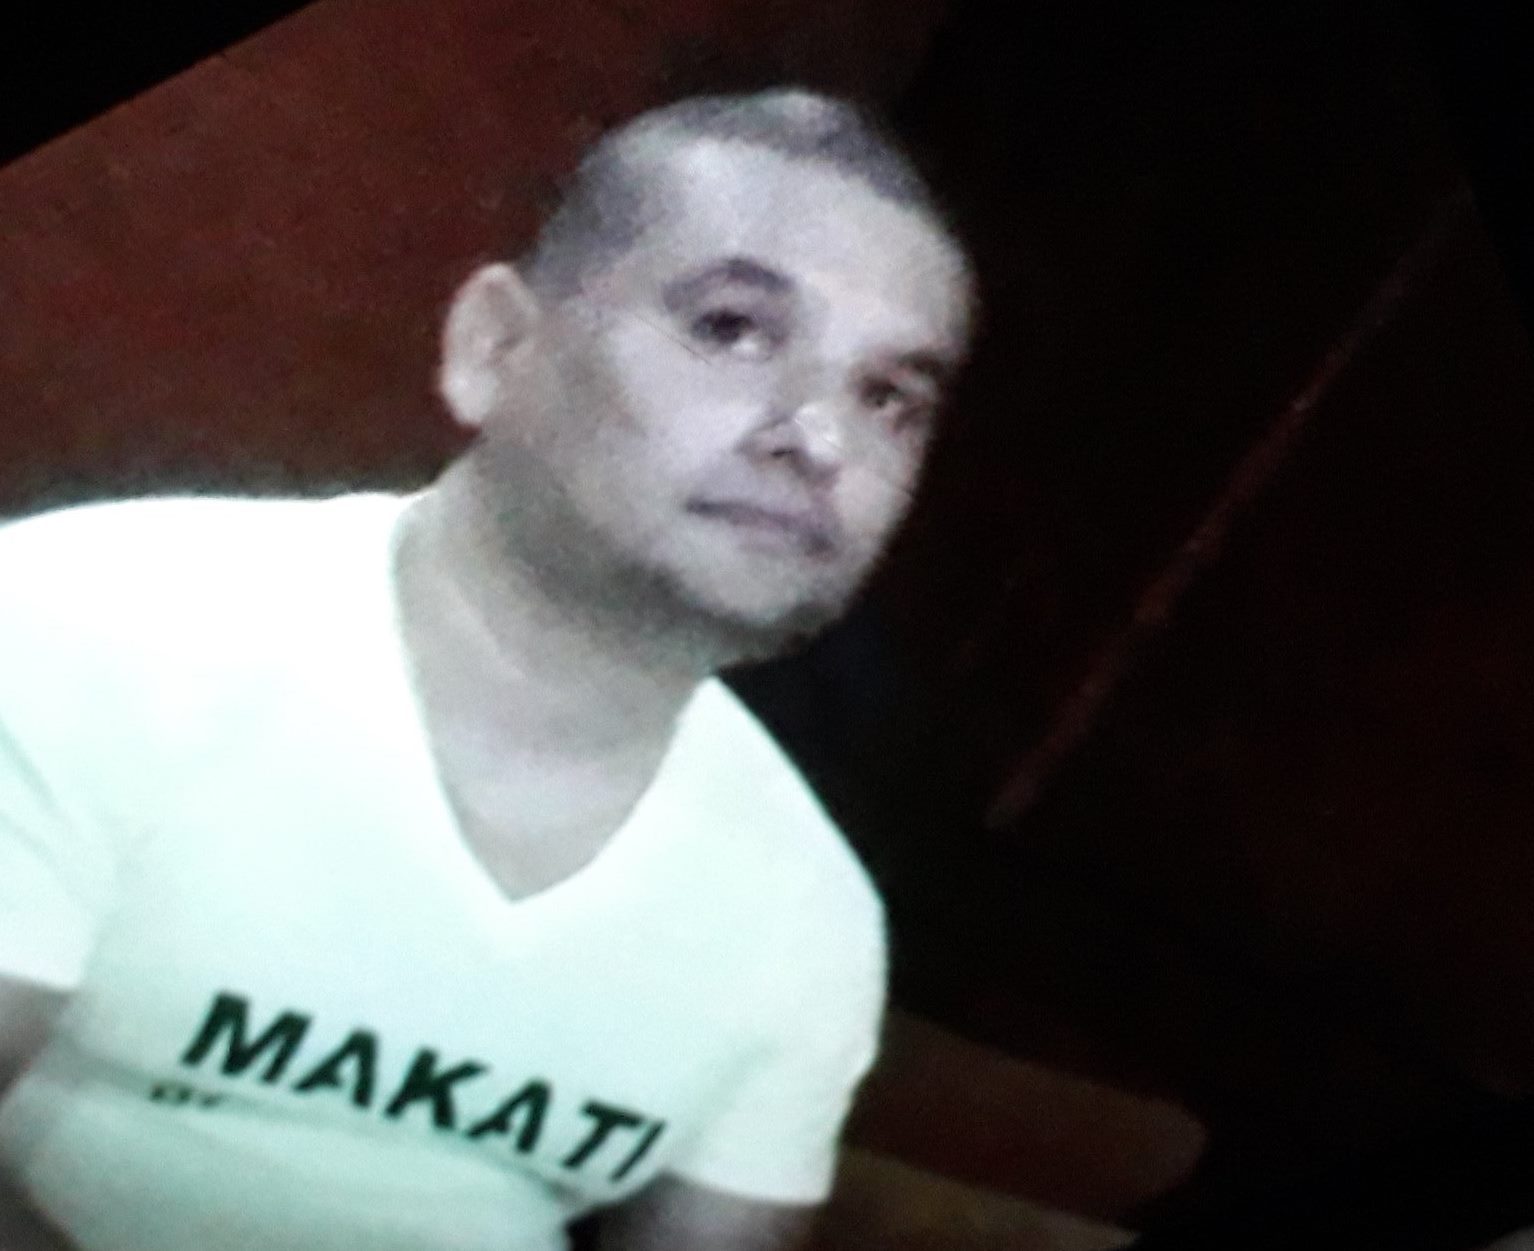 PH court convicts Mexican suspected to be member of Sinaloa drug cartel